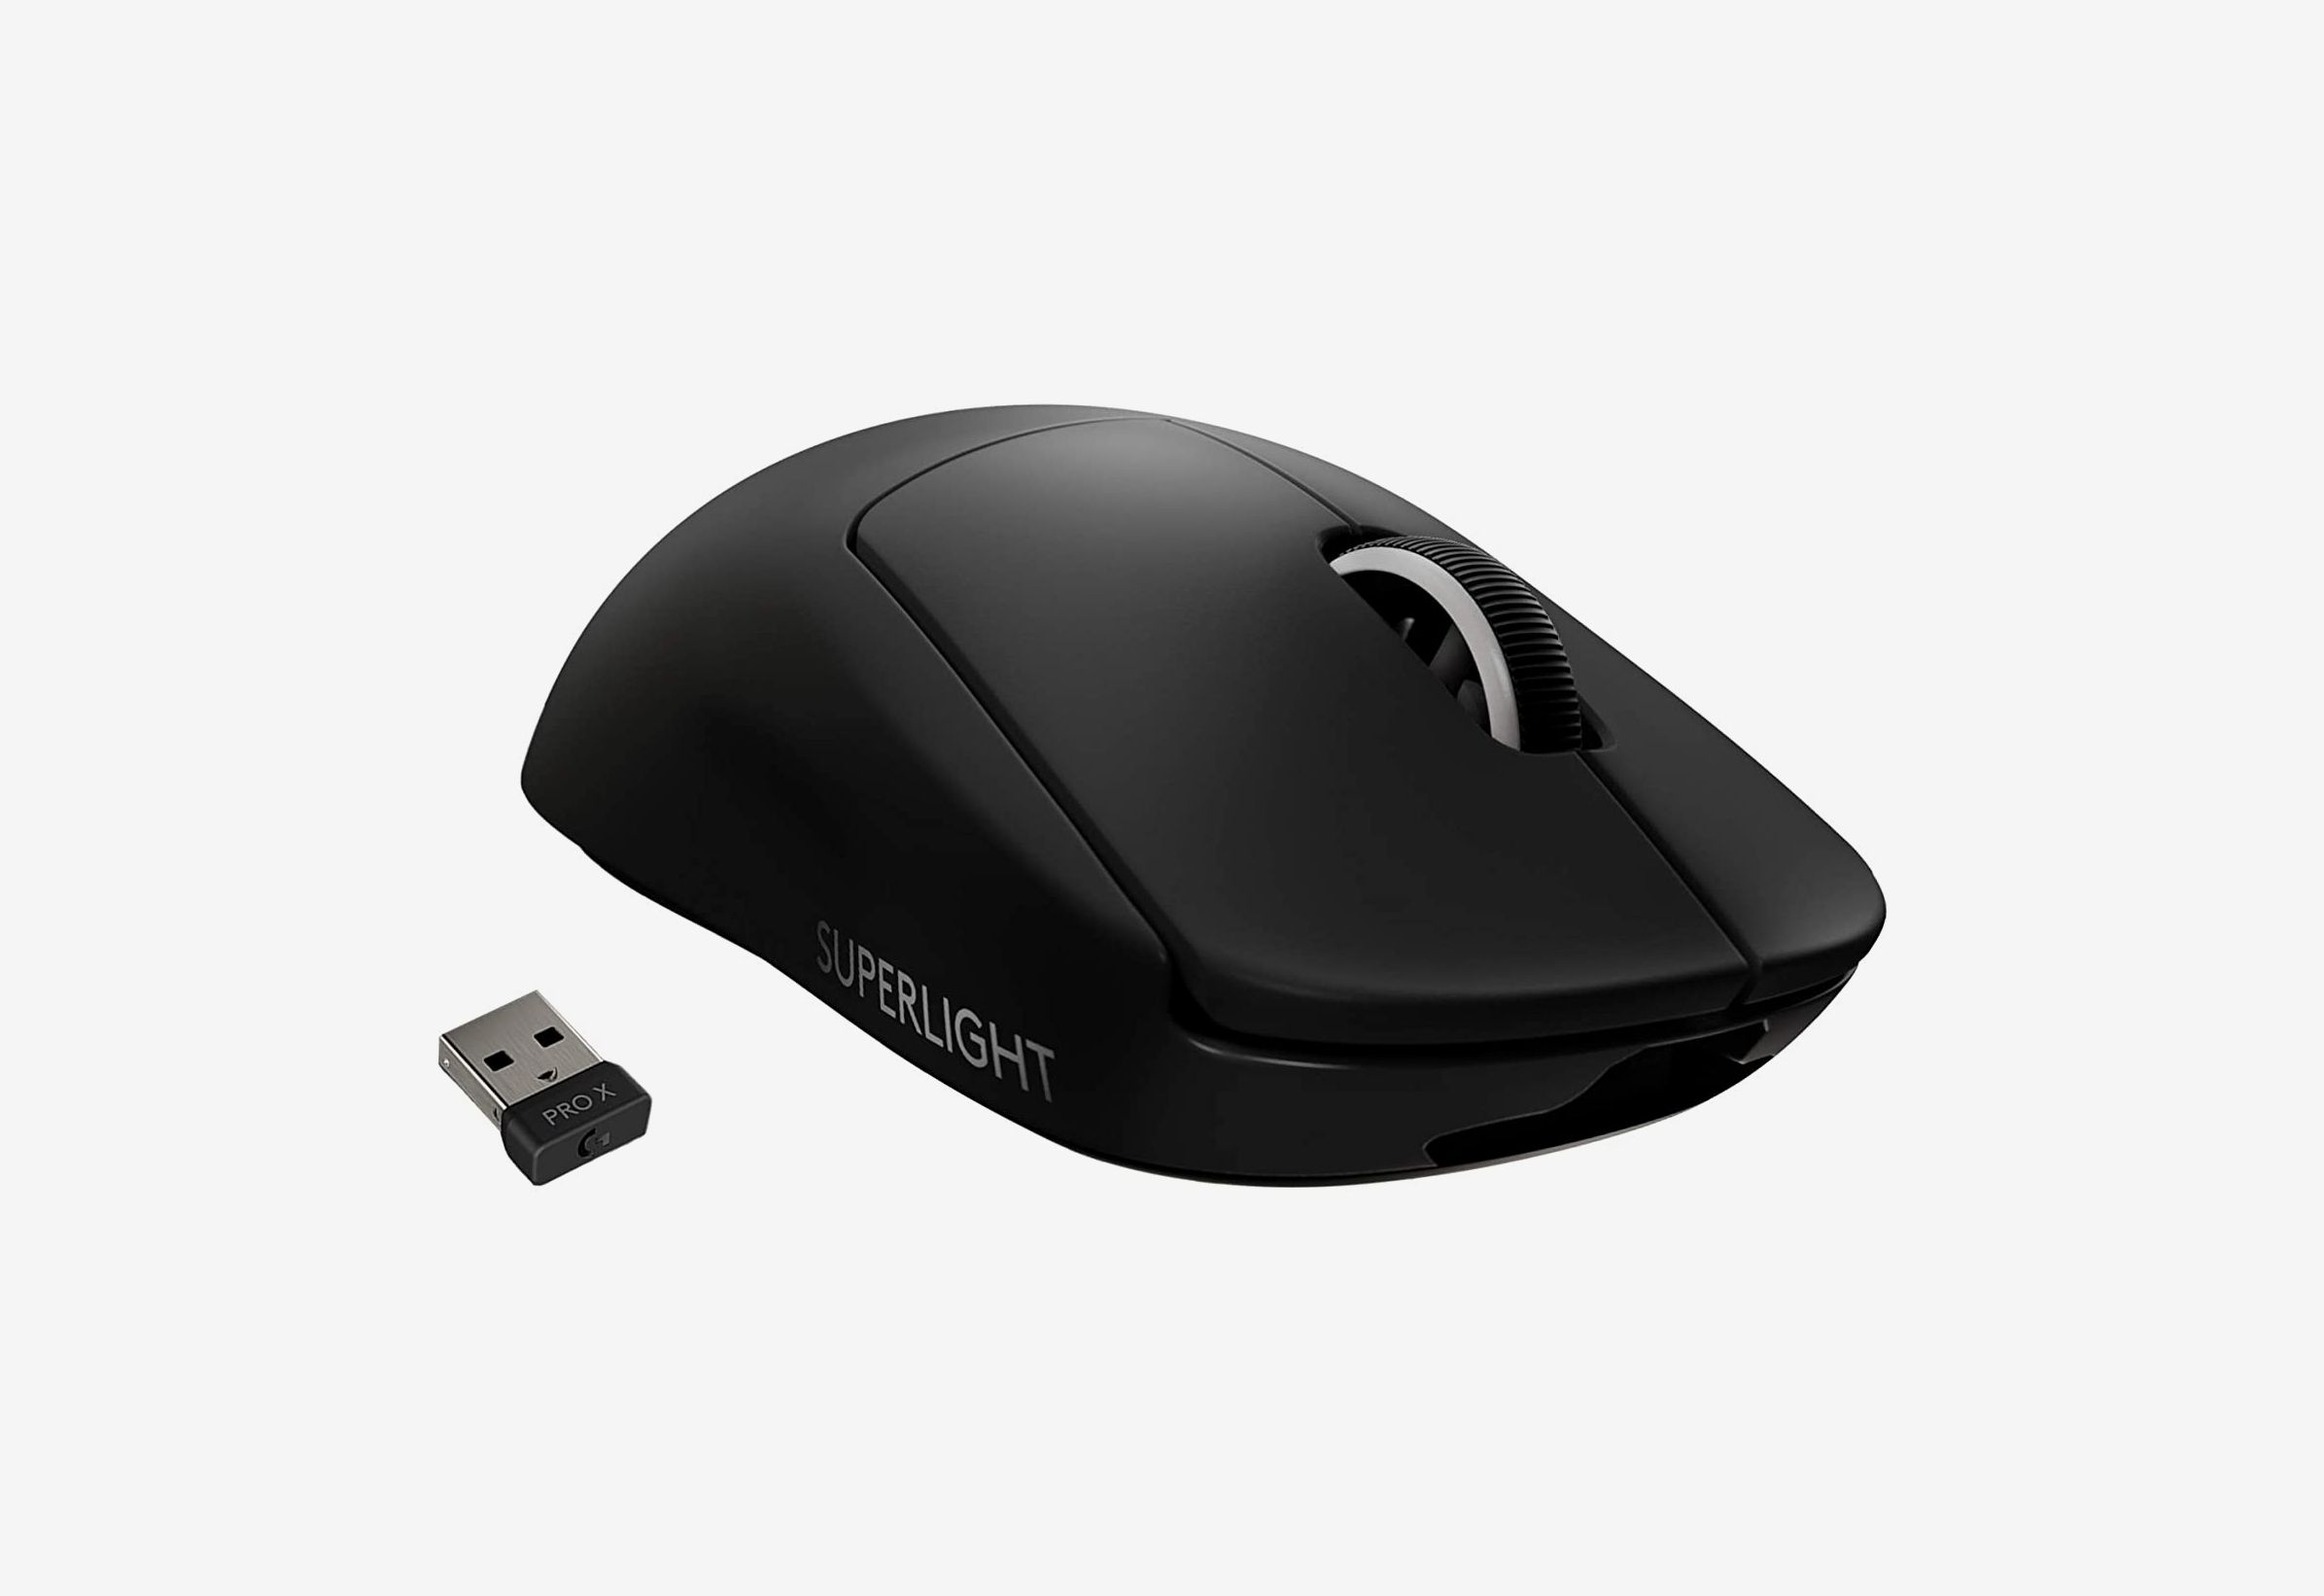 whats the best gaming mouse right now